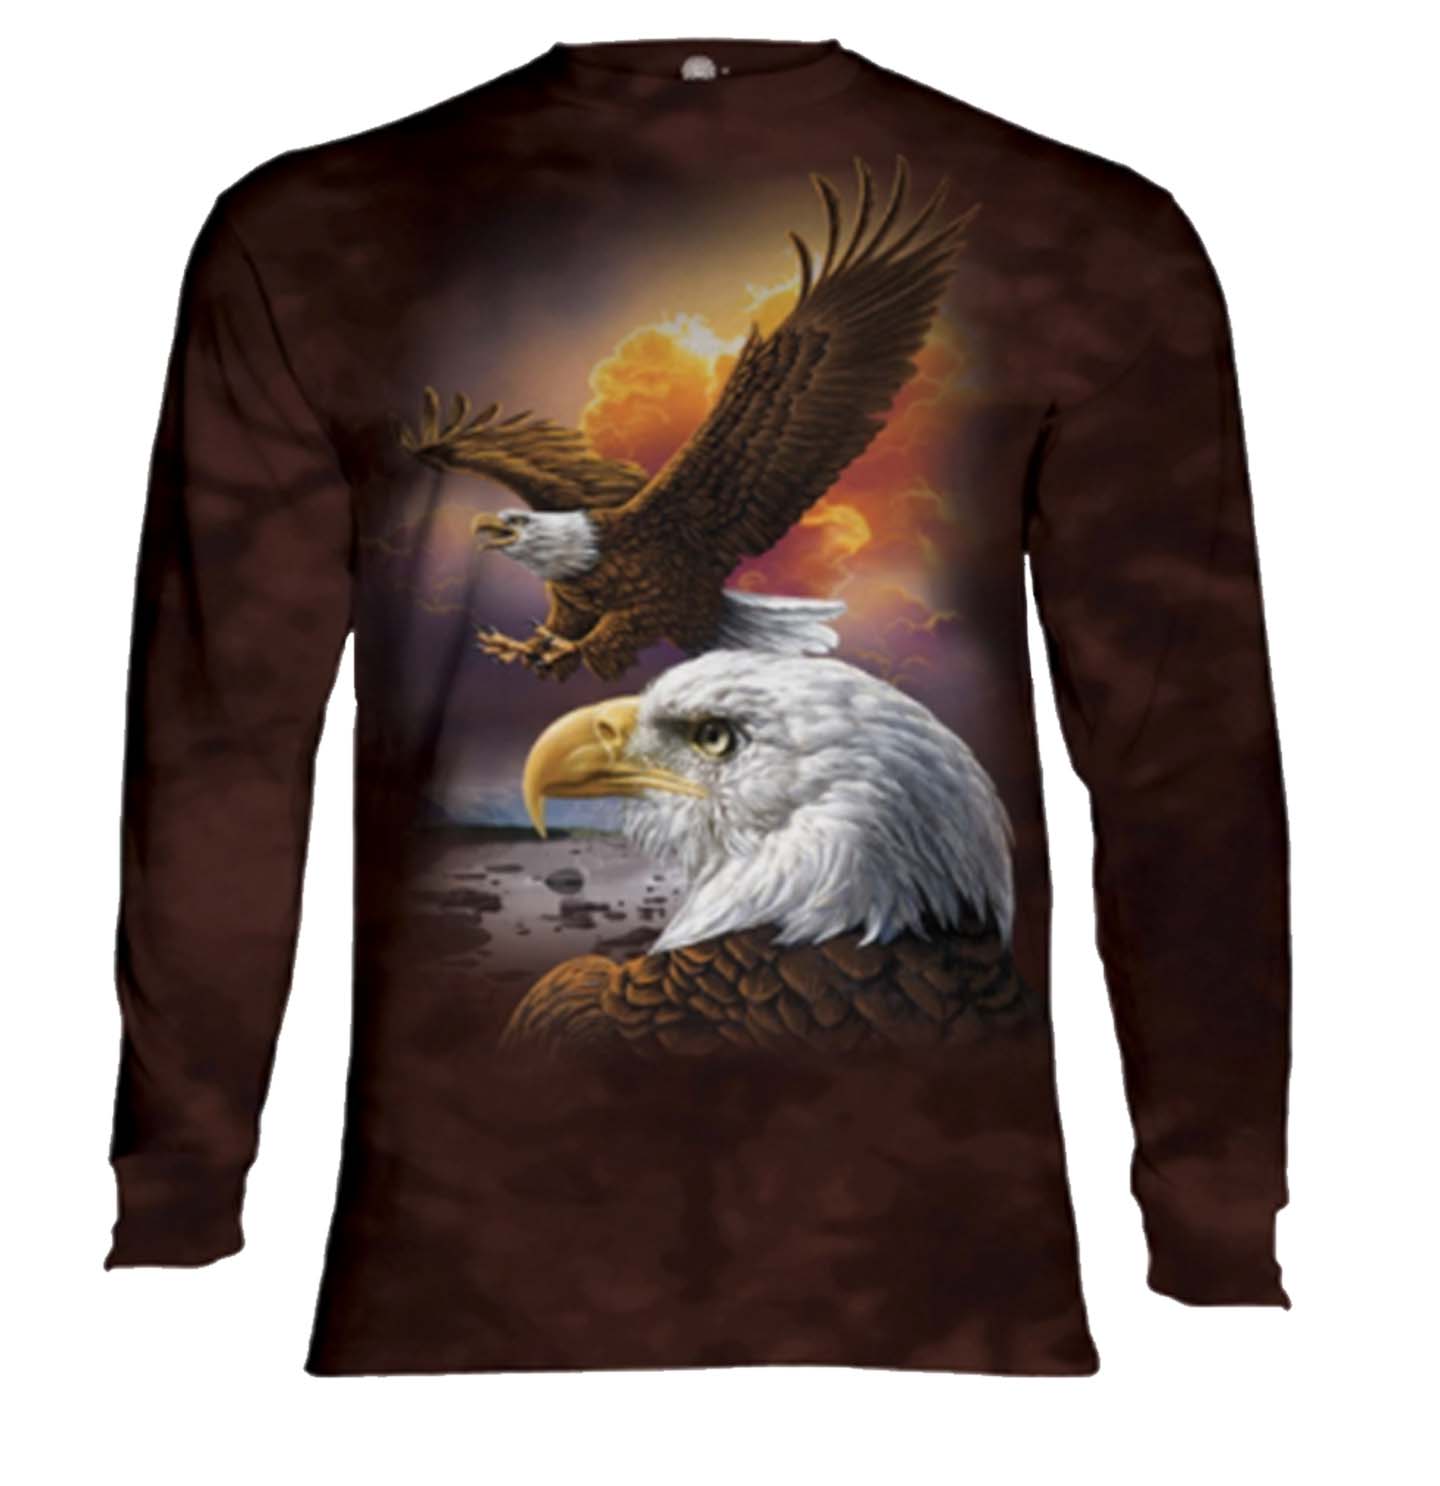 Animal Pride - Eagle & Clouds - Adult Unisex Long Sleeve T-Shirt